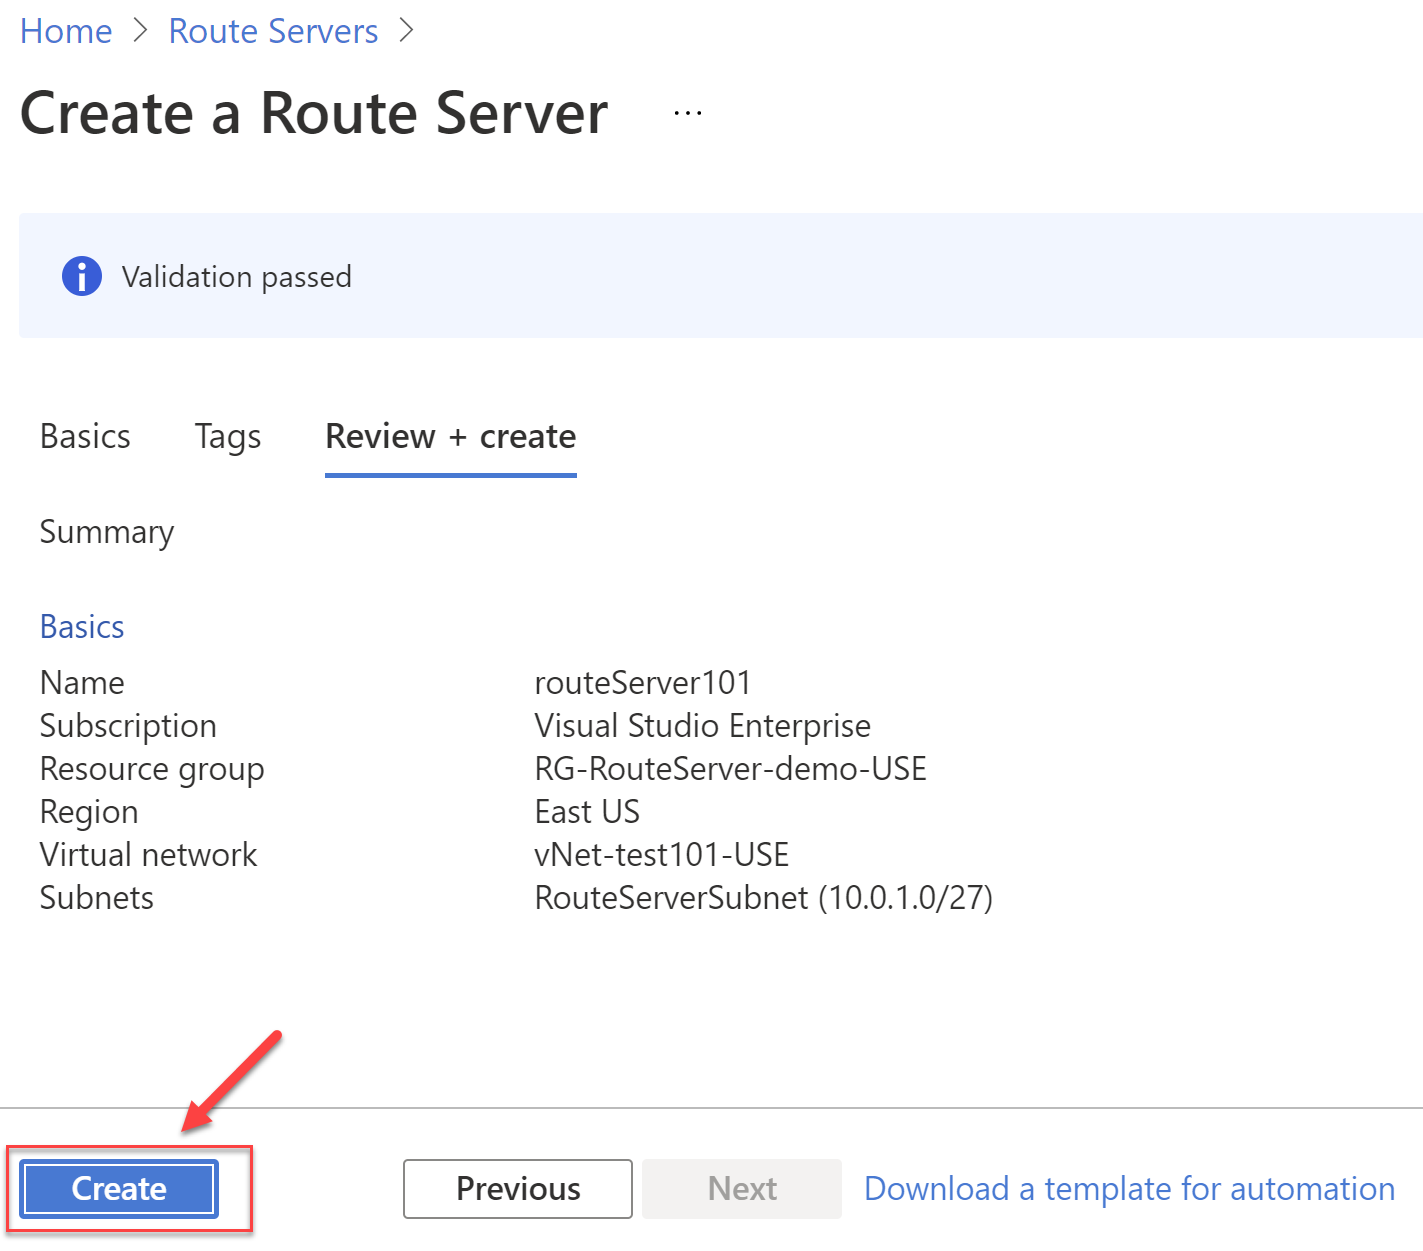 Create the Route Server